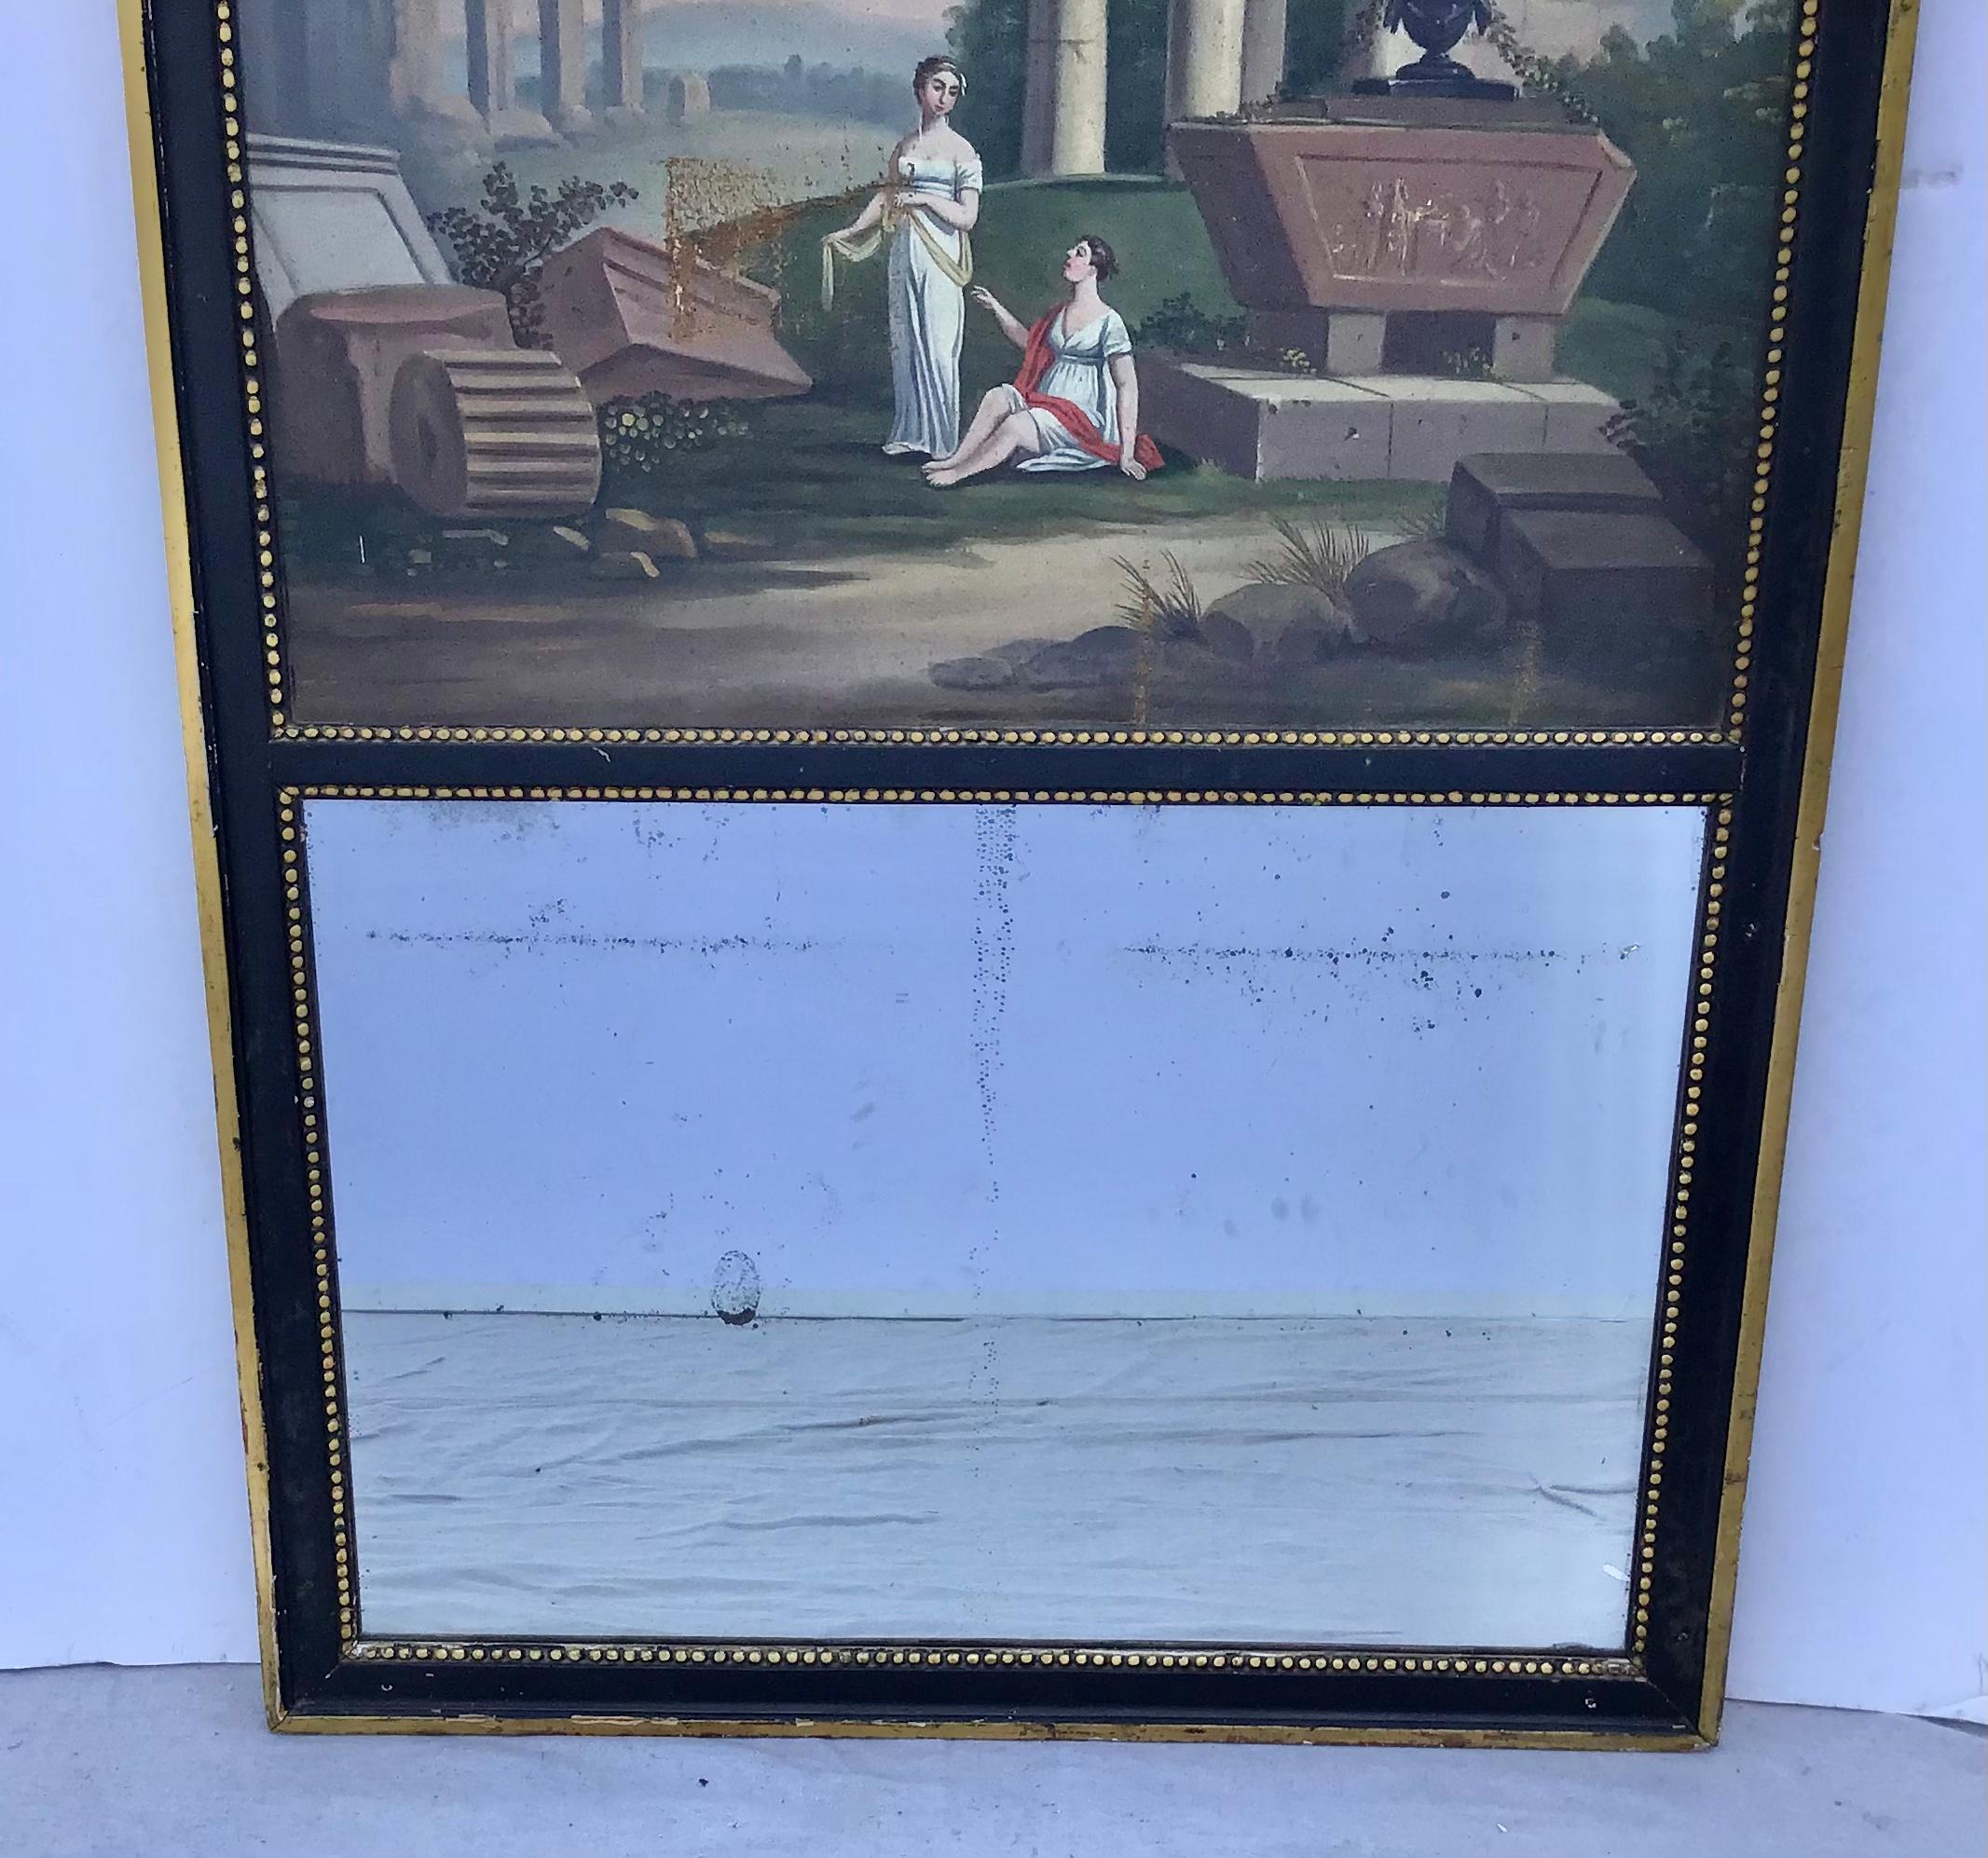 An early 19th century French Louis XV style trumeau mirror. Fine oil painting depicting two maidens in a garden setting with a ruins in the background. Giltwood frame with beaded border trim. Original mirror with old silvering. Wonderful old world